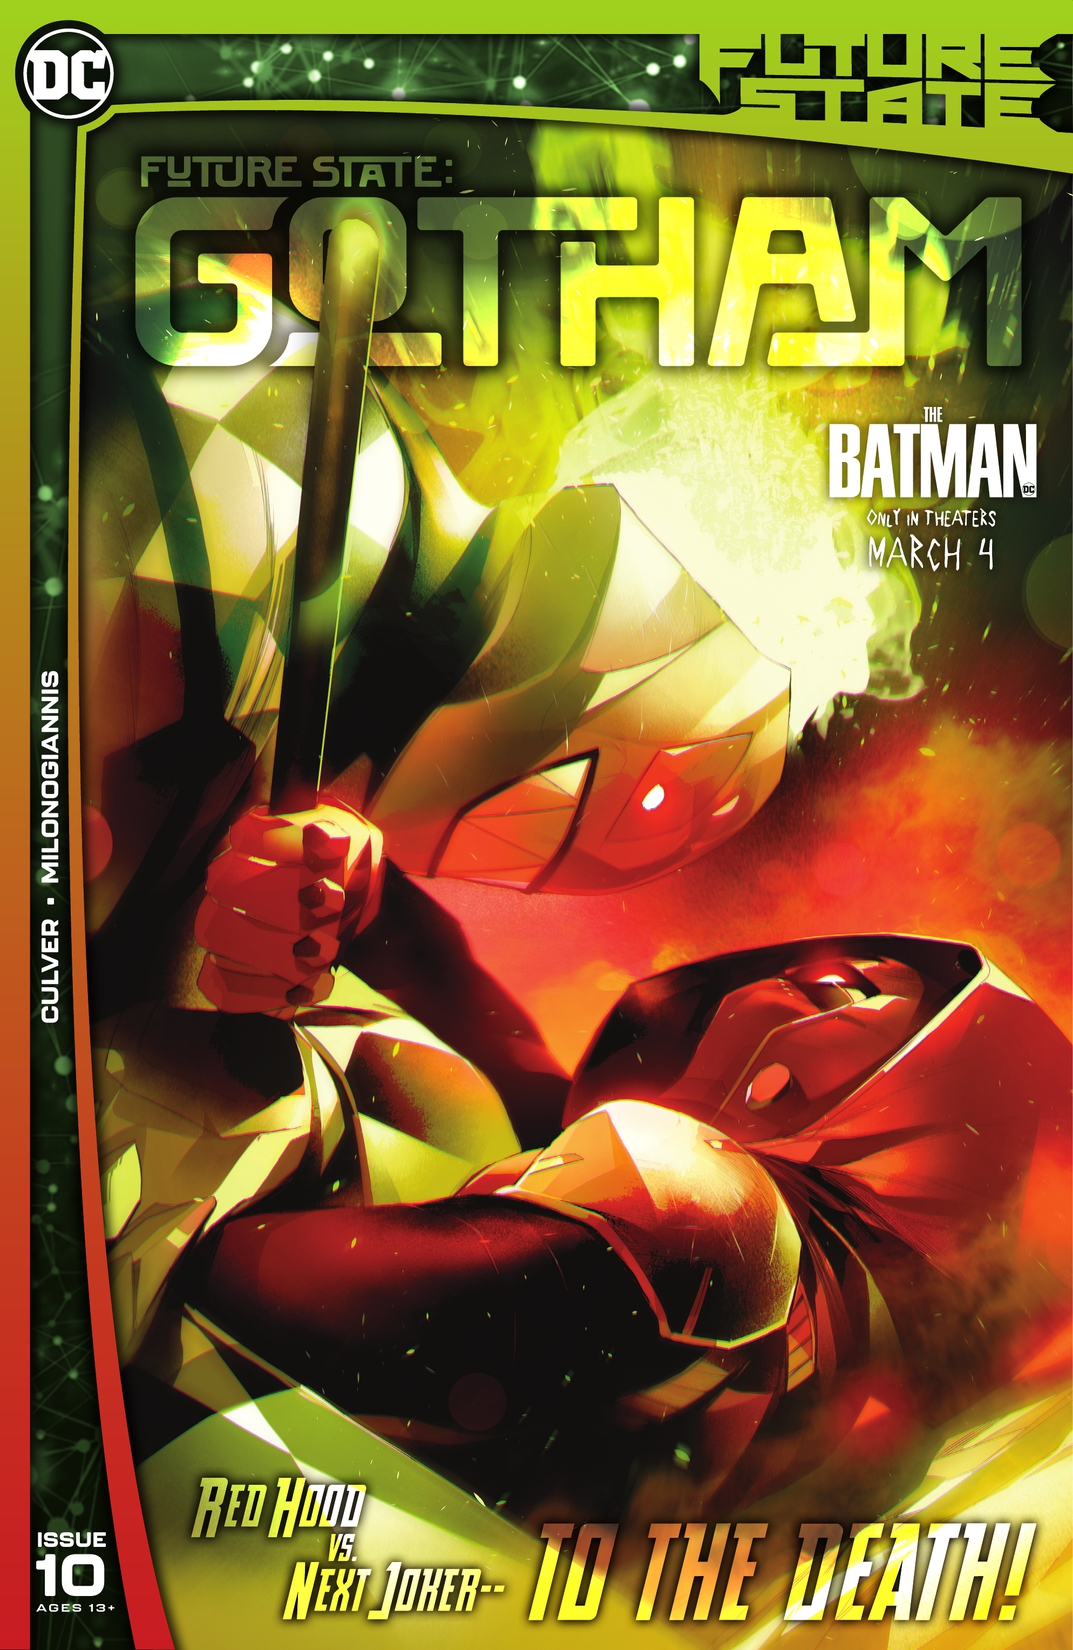 Future State: Gotham #10 preview images